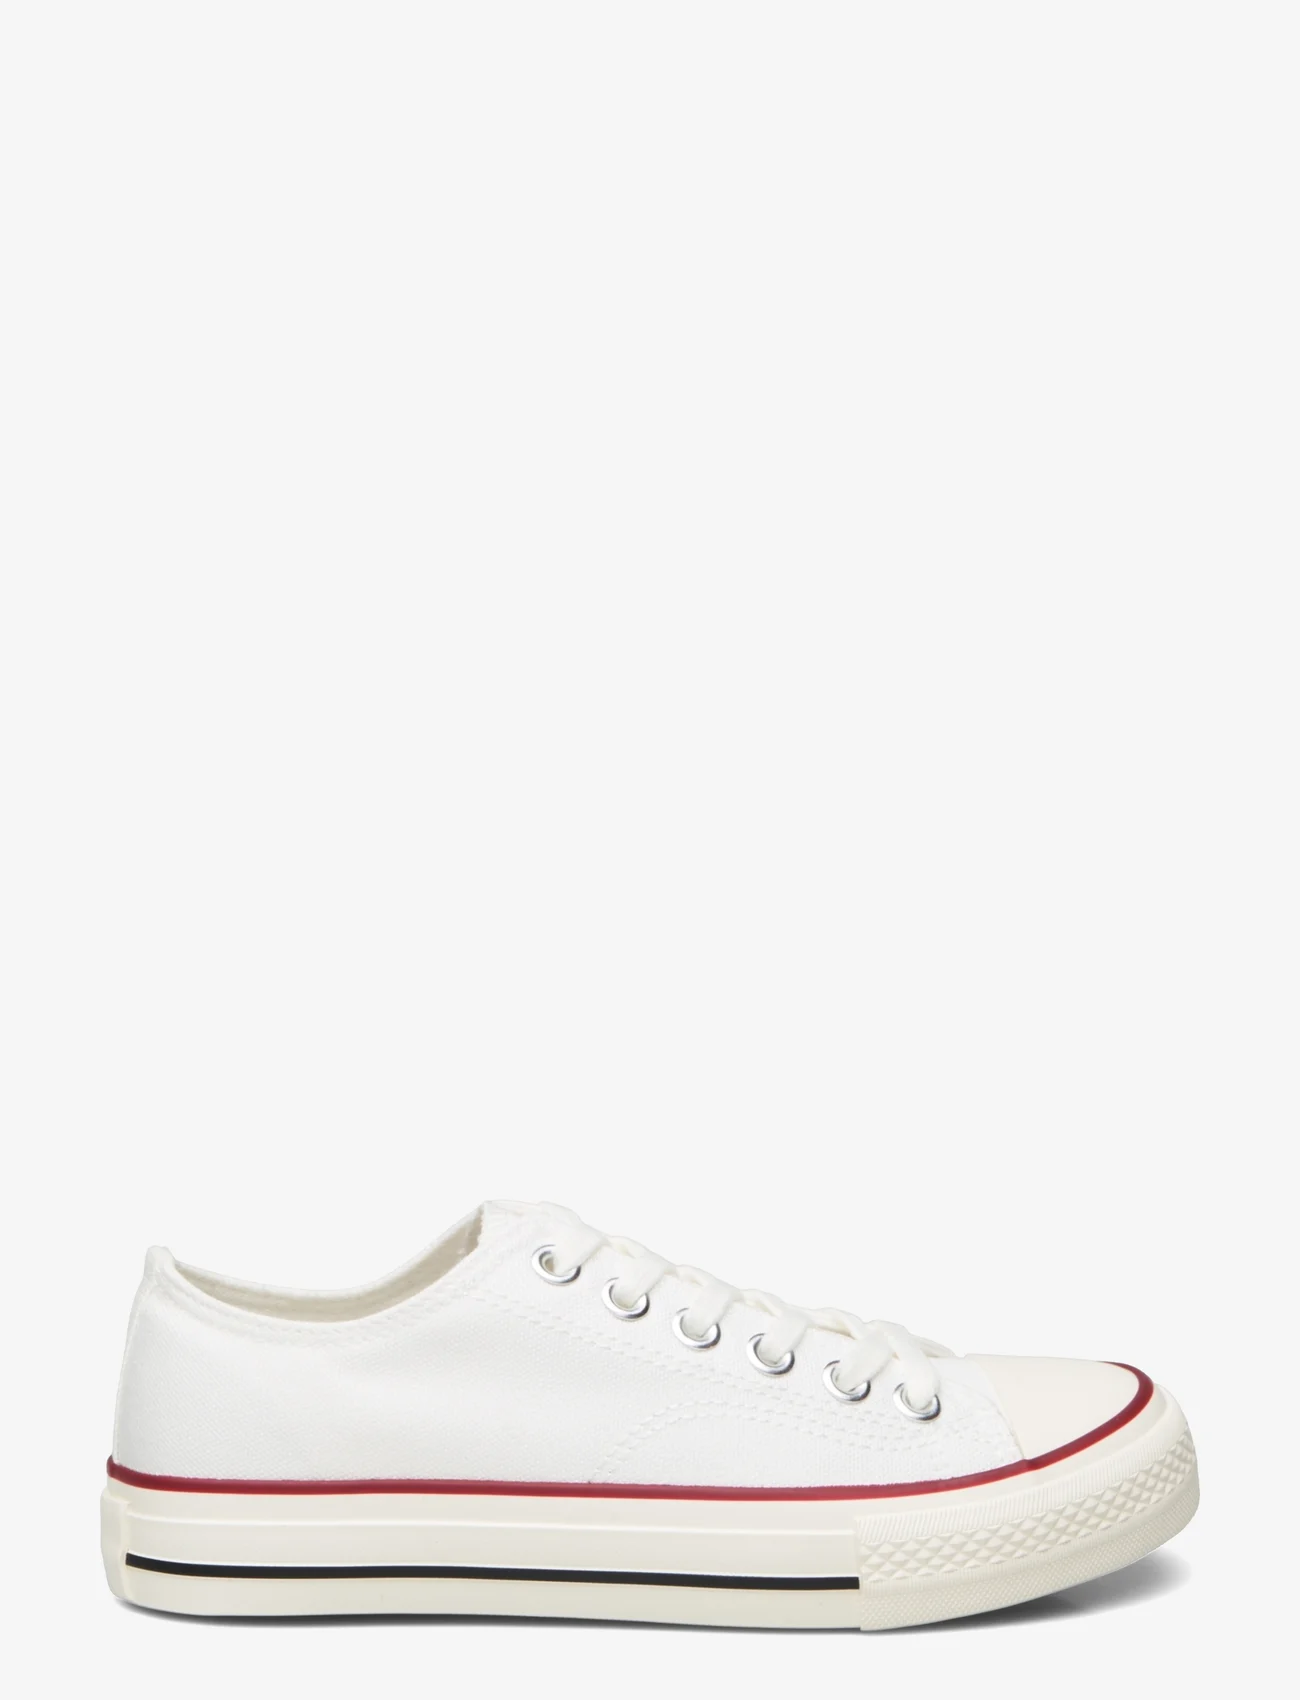 Exani - ANGELES LOW W - low top sneakers - white - 1